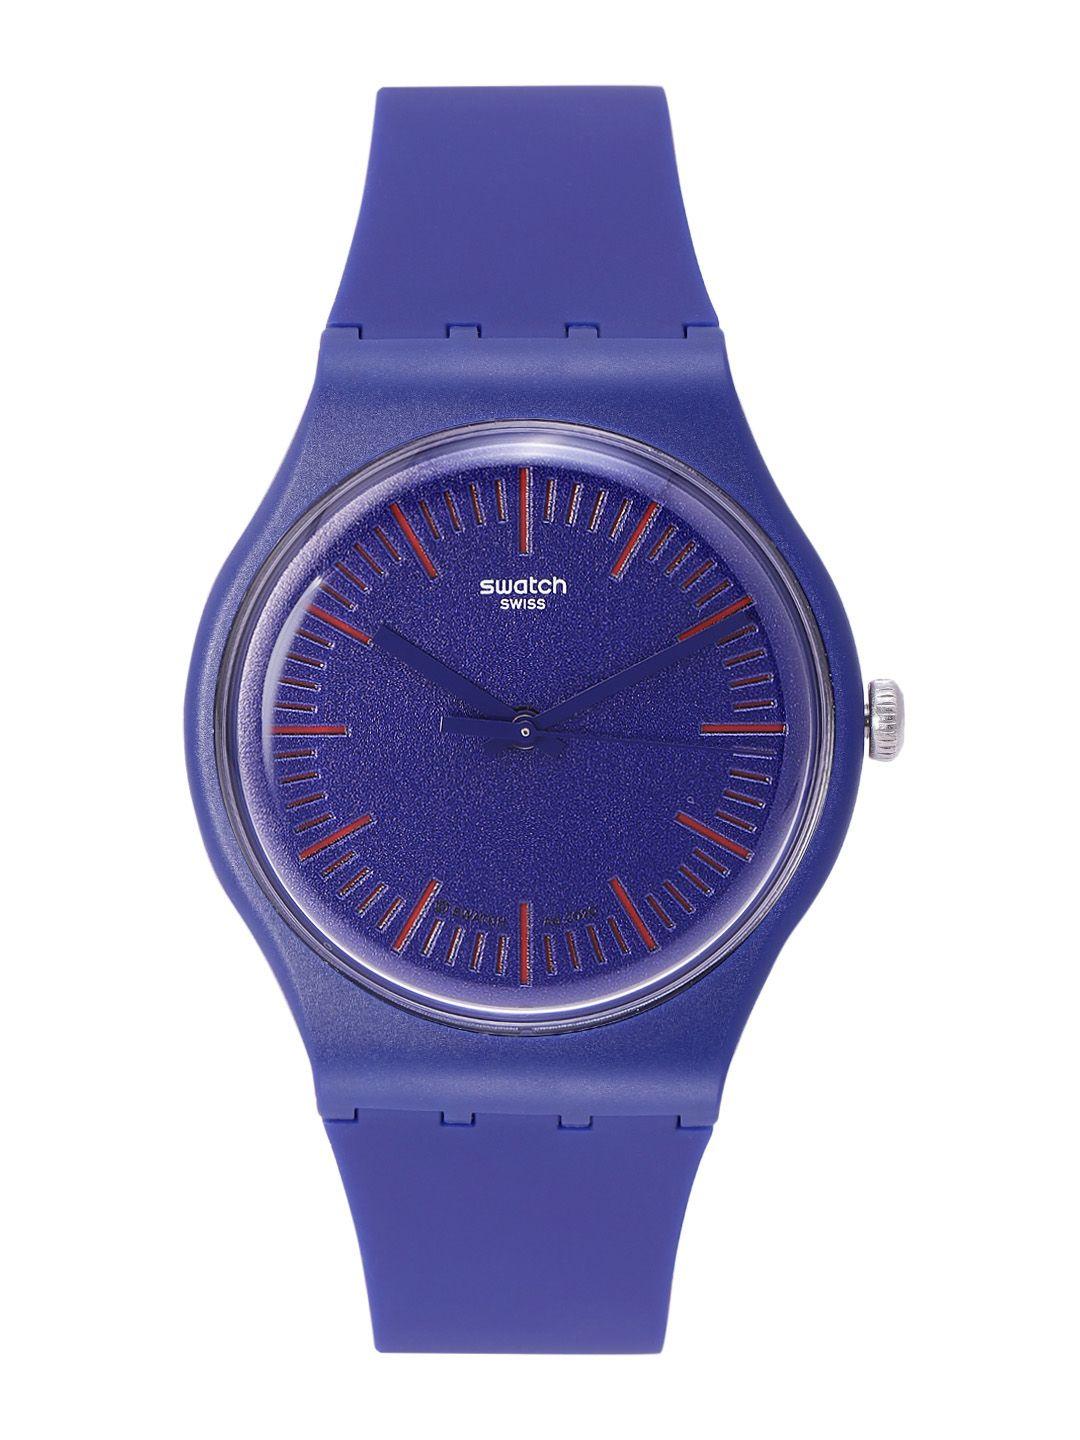 swatch-unisex-blue-water-resistant-analogue-watch-suon146